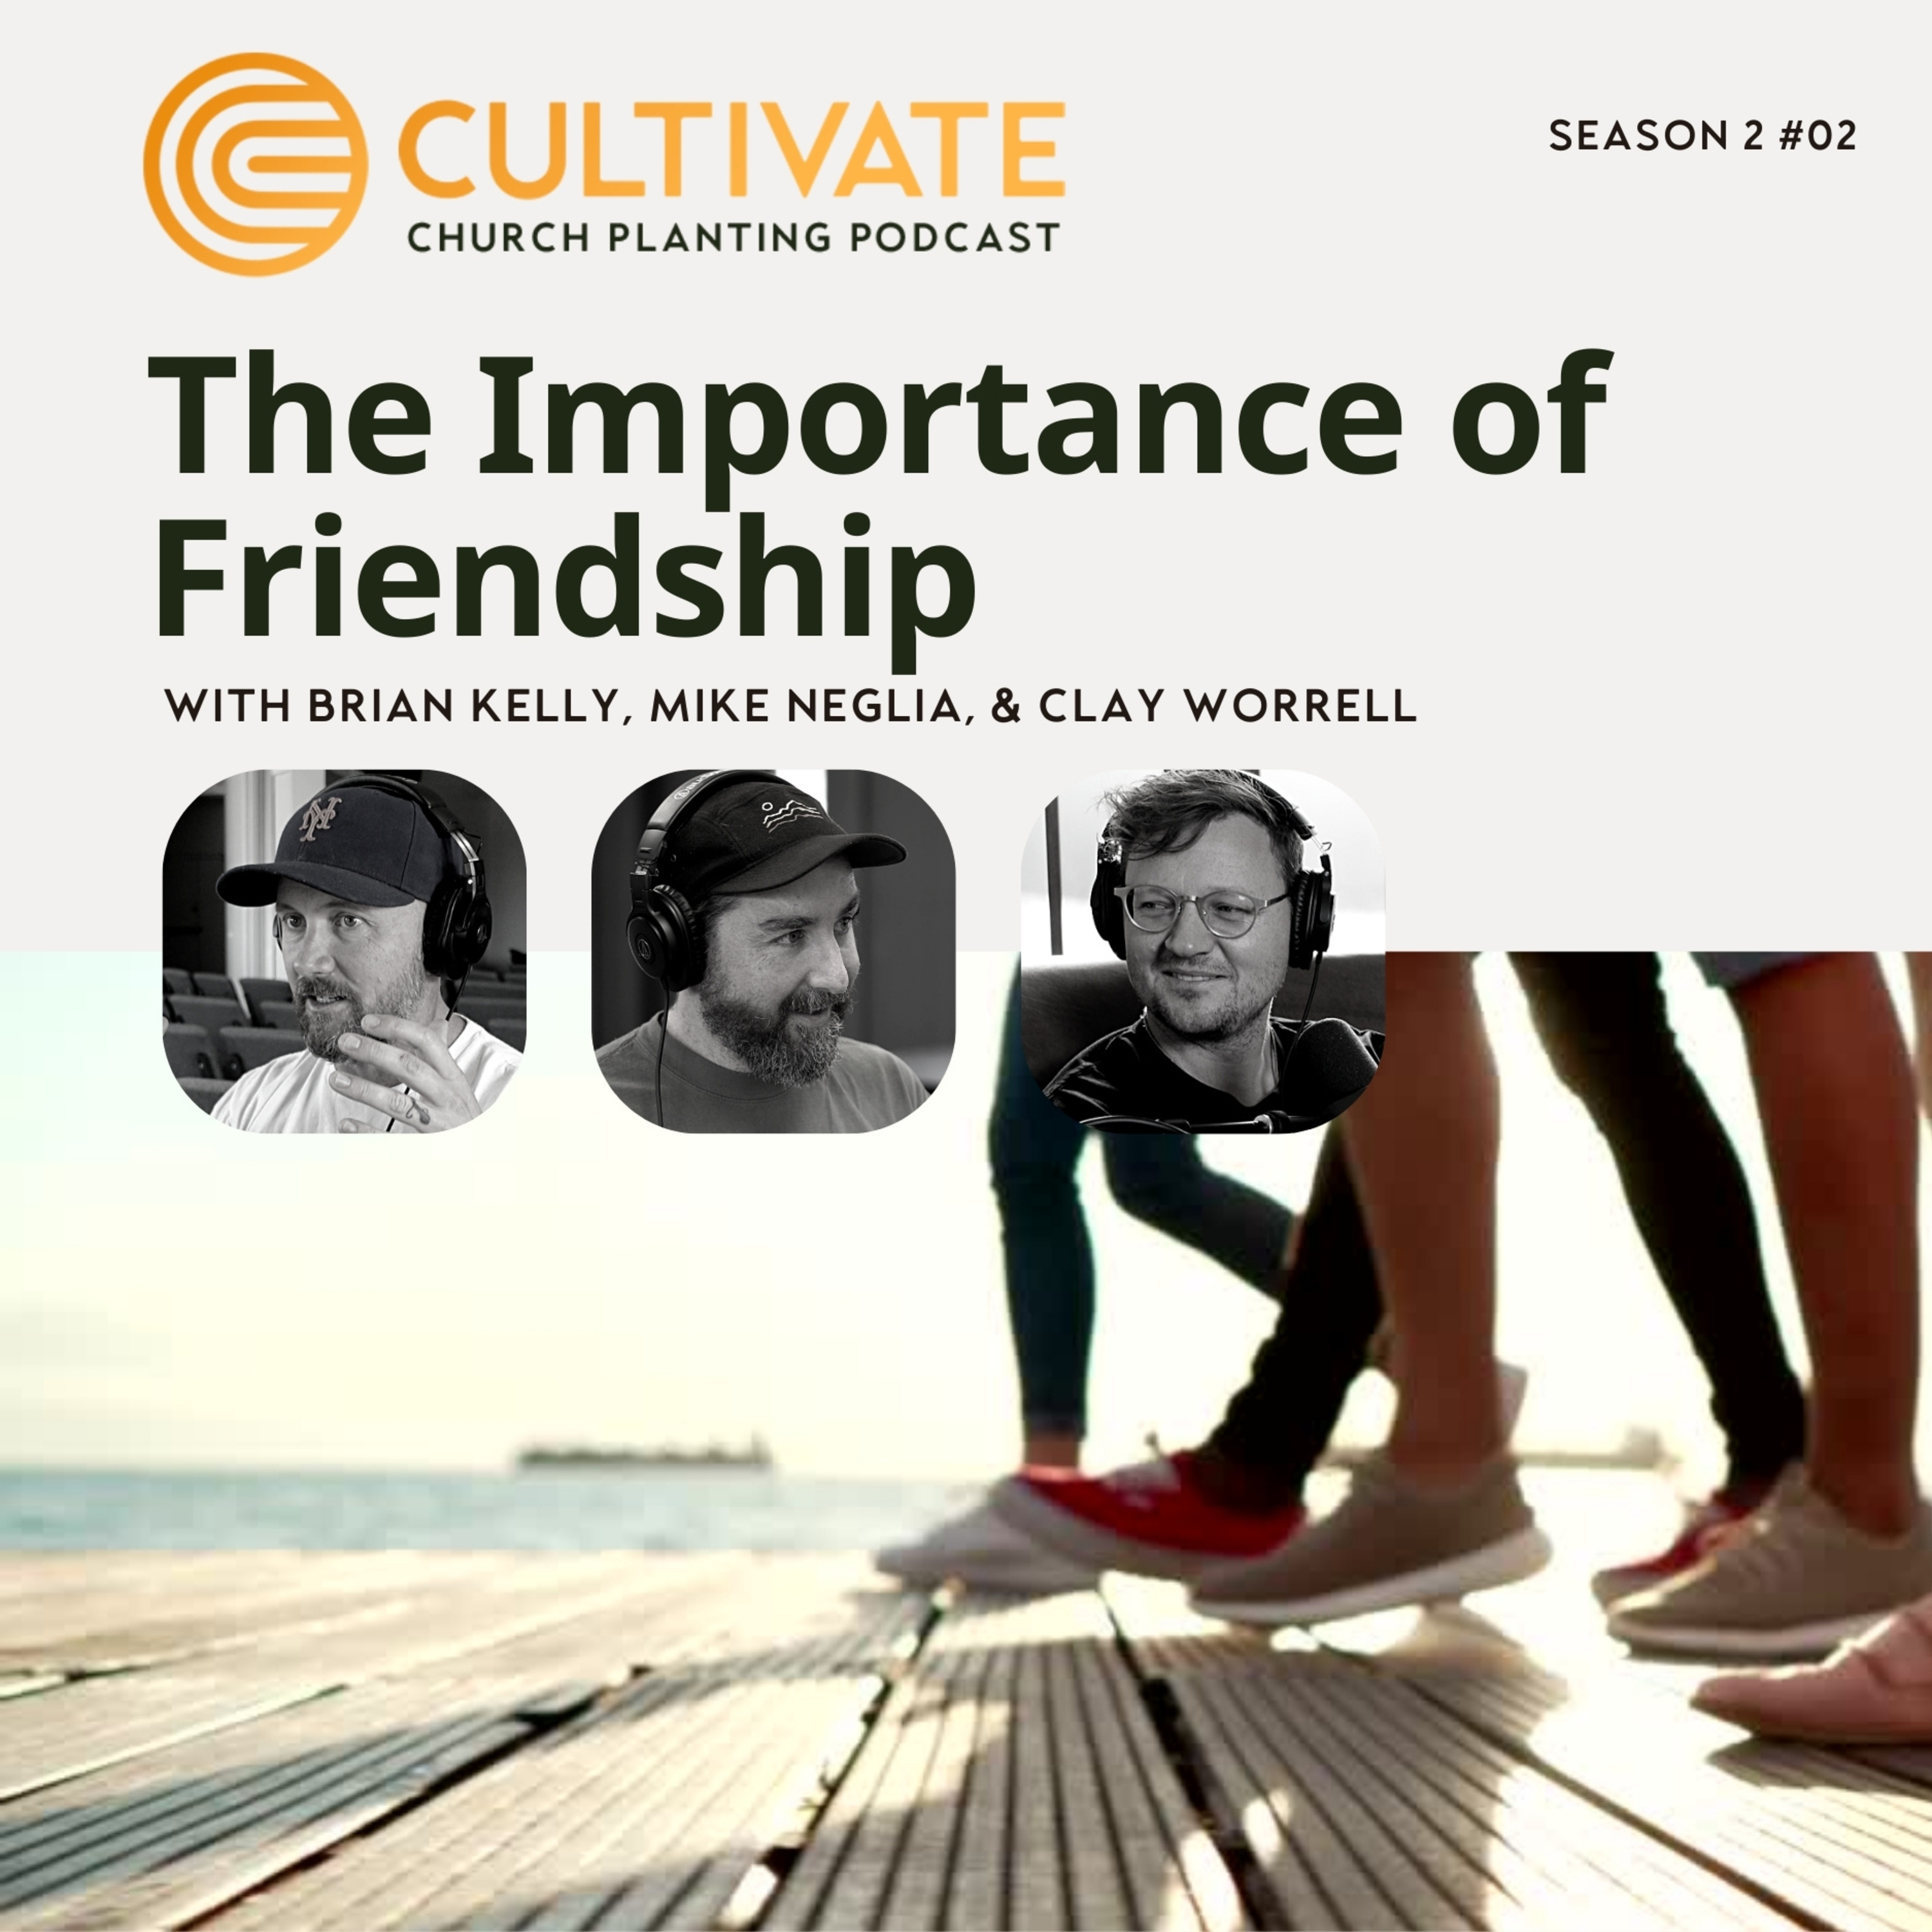 The Importance of Friendship – Mike Neglia and Clay Worrell